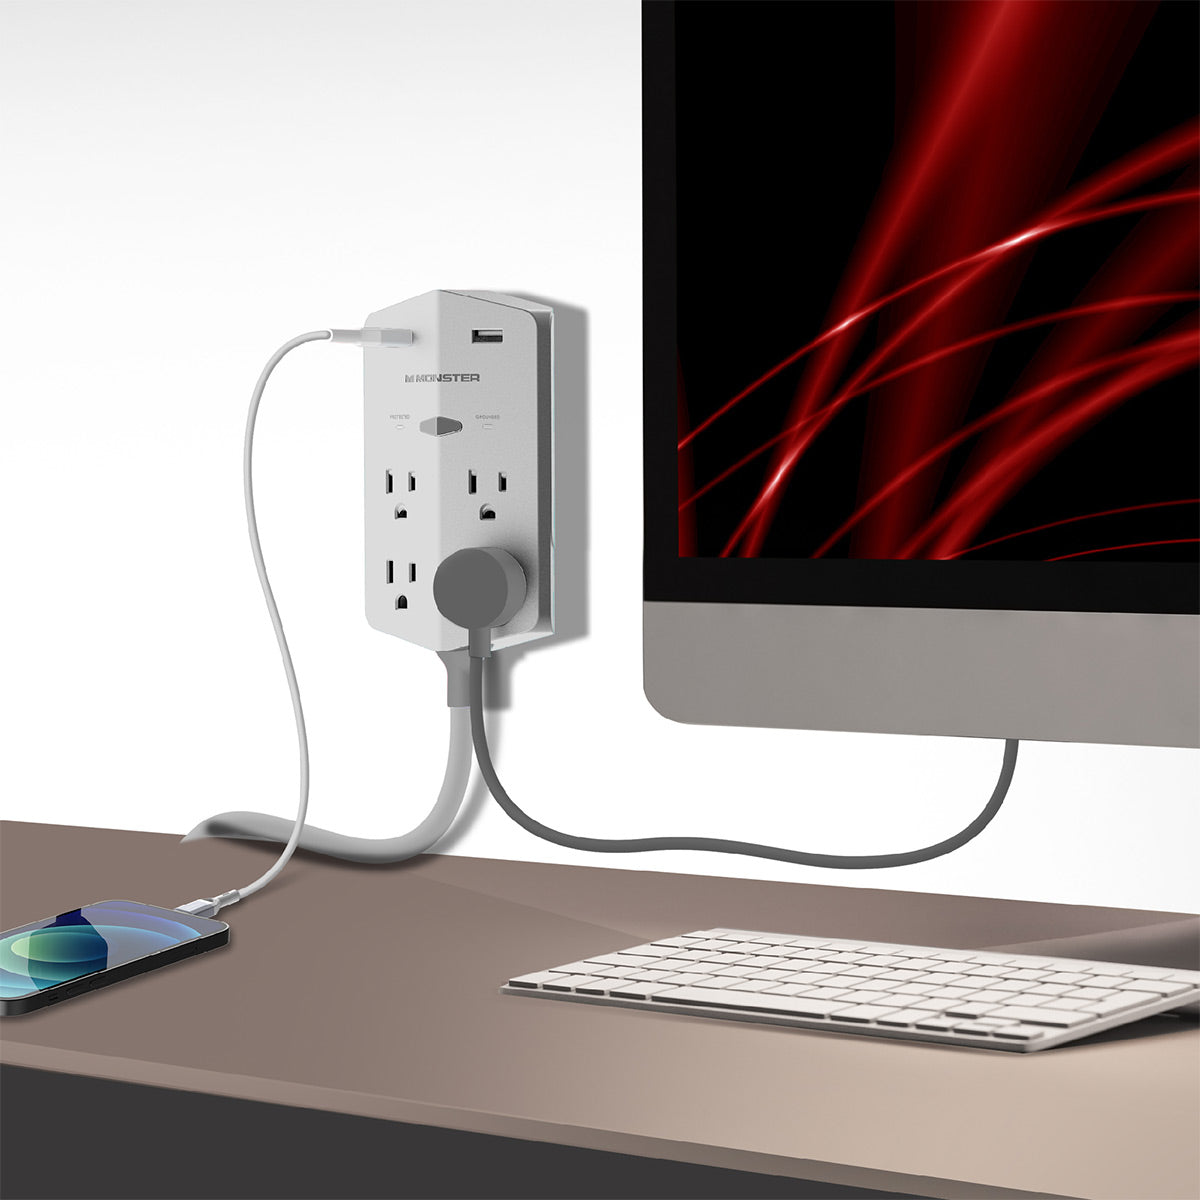 Monster Power Shield XL 540 Joule Surge Protector with 4 AC Outlets & 2 USB-A Ports (White)